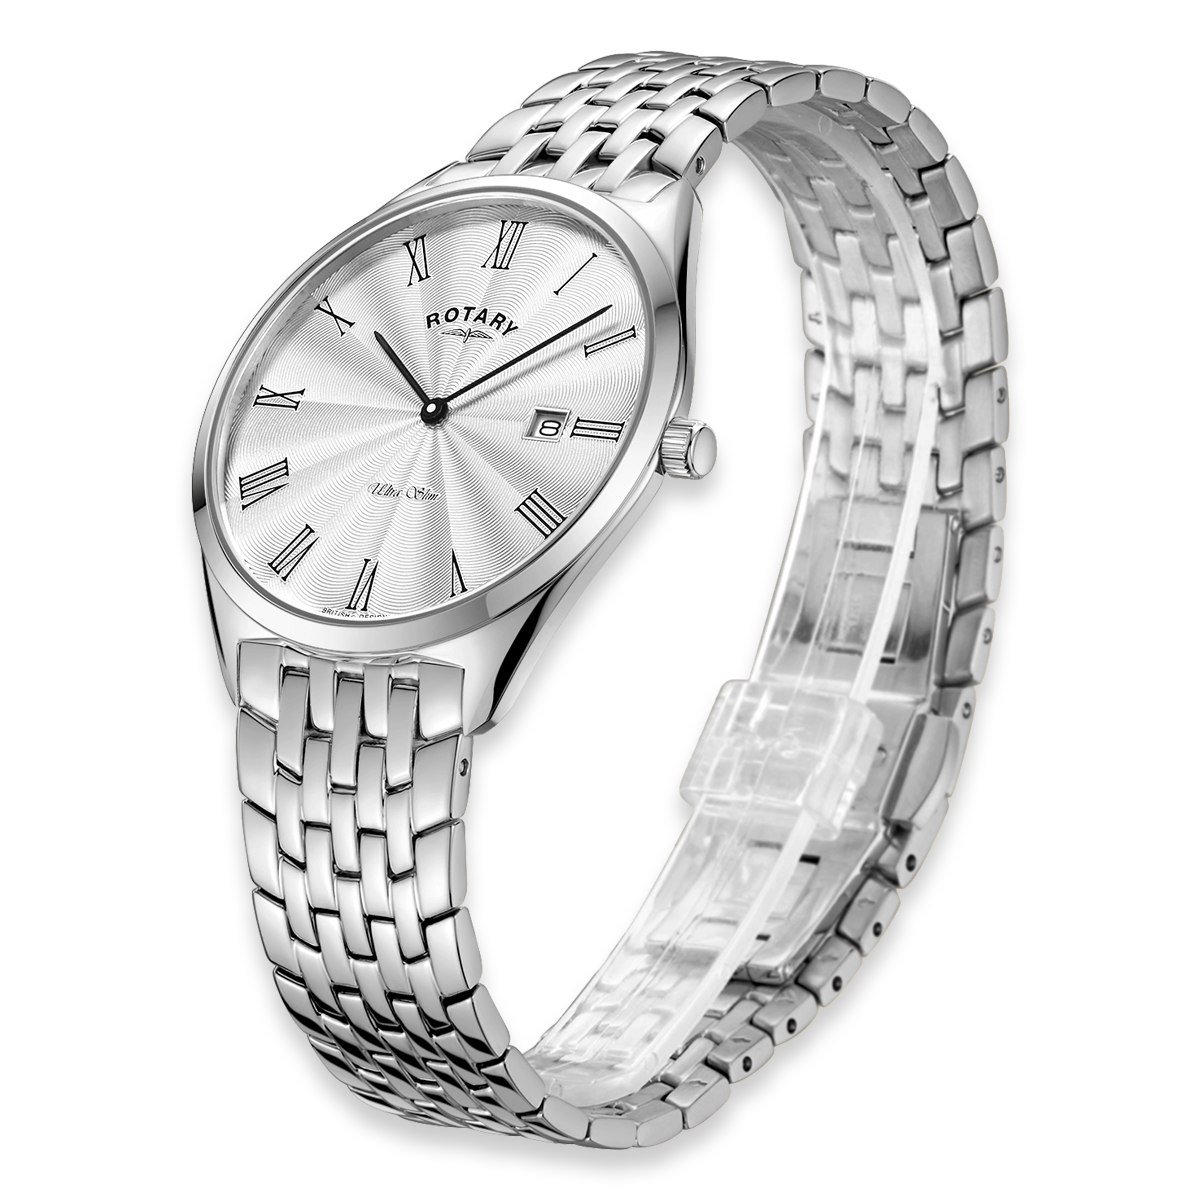 Rotary Ultra Slim Watch, Silver Dial with Stainless Steel Bracelet - GB08010/01